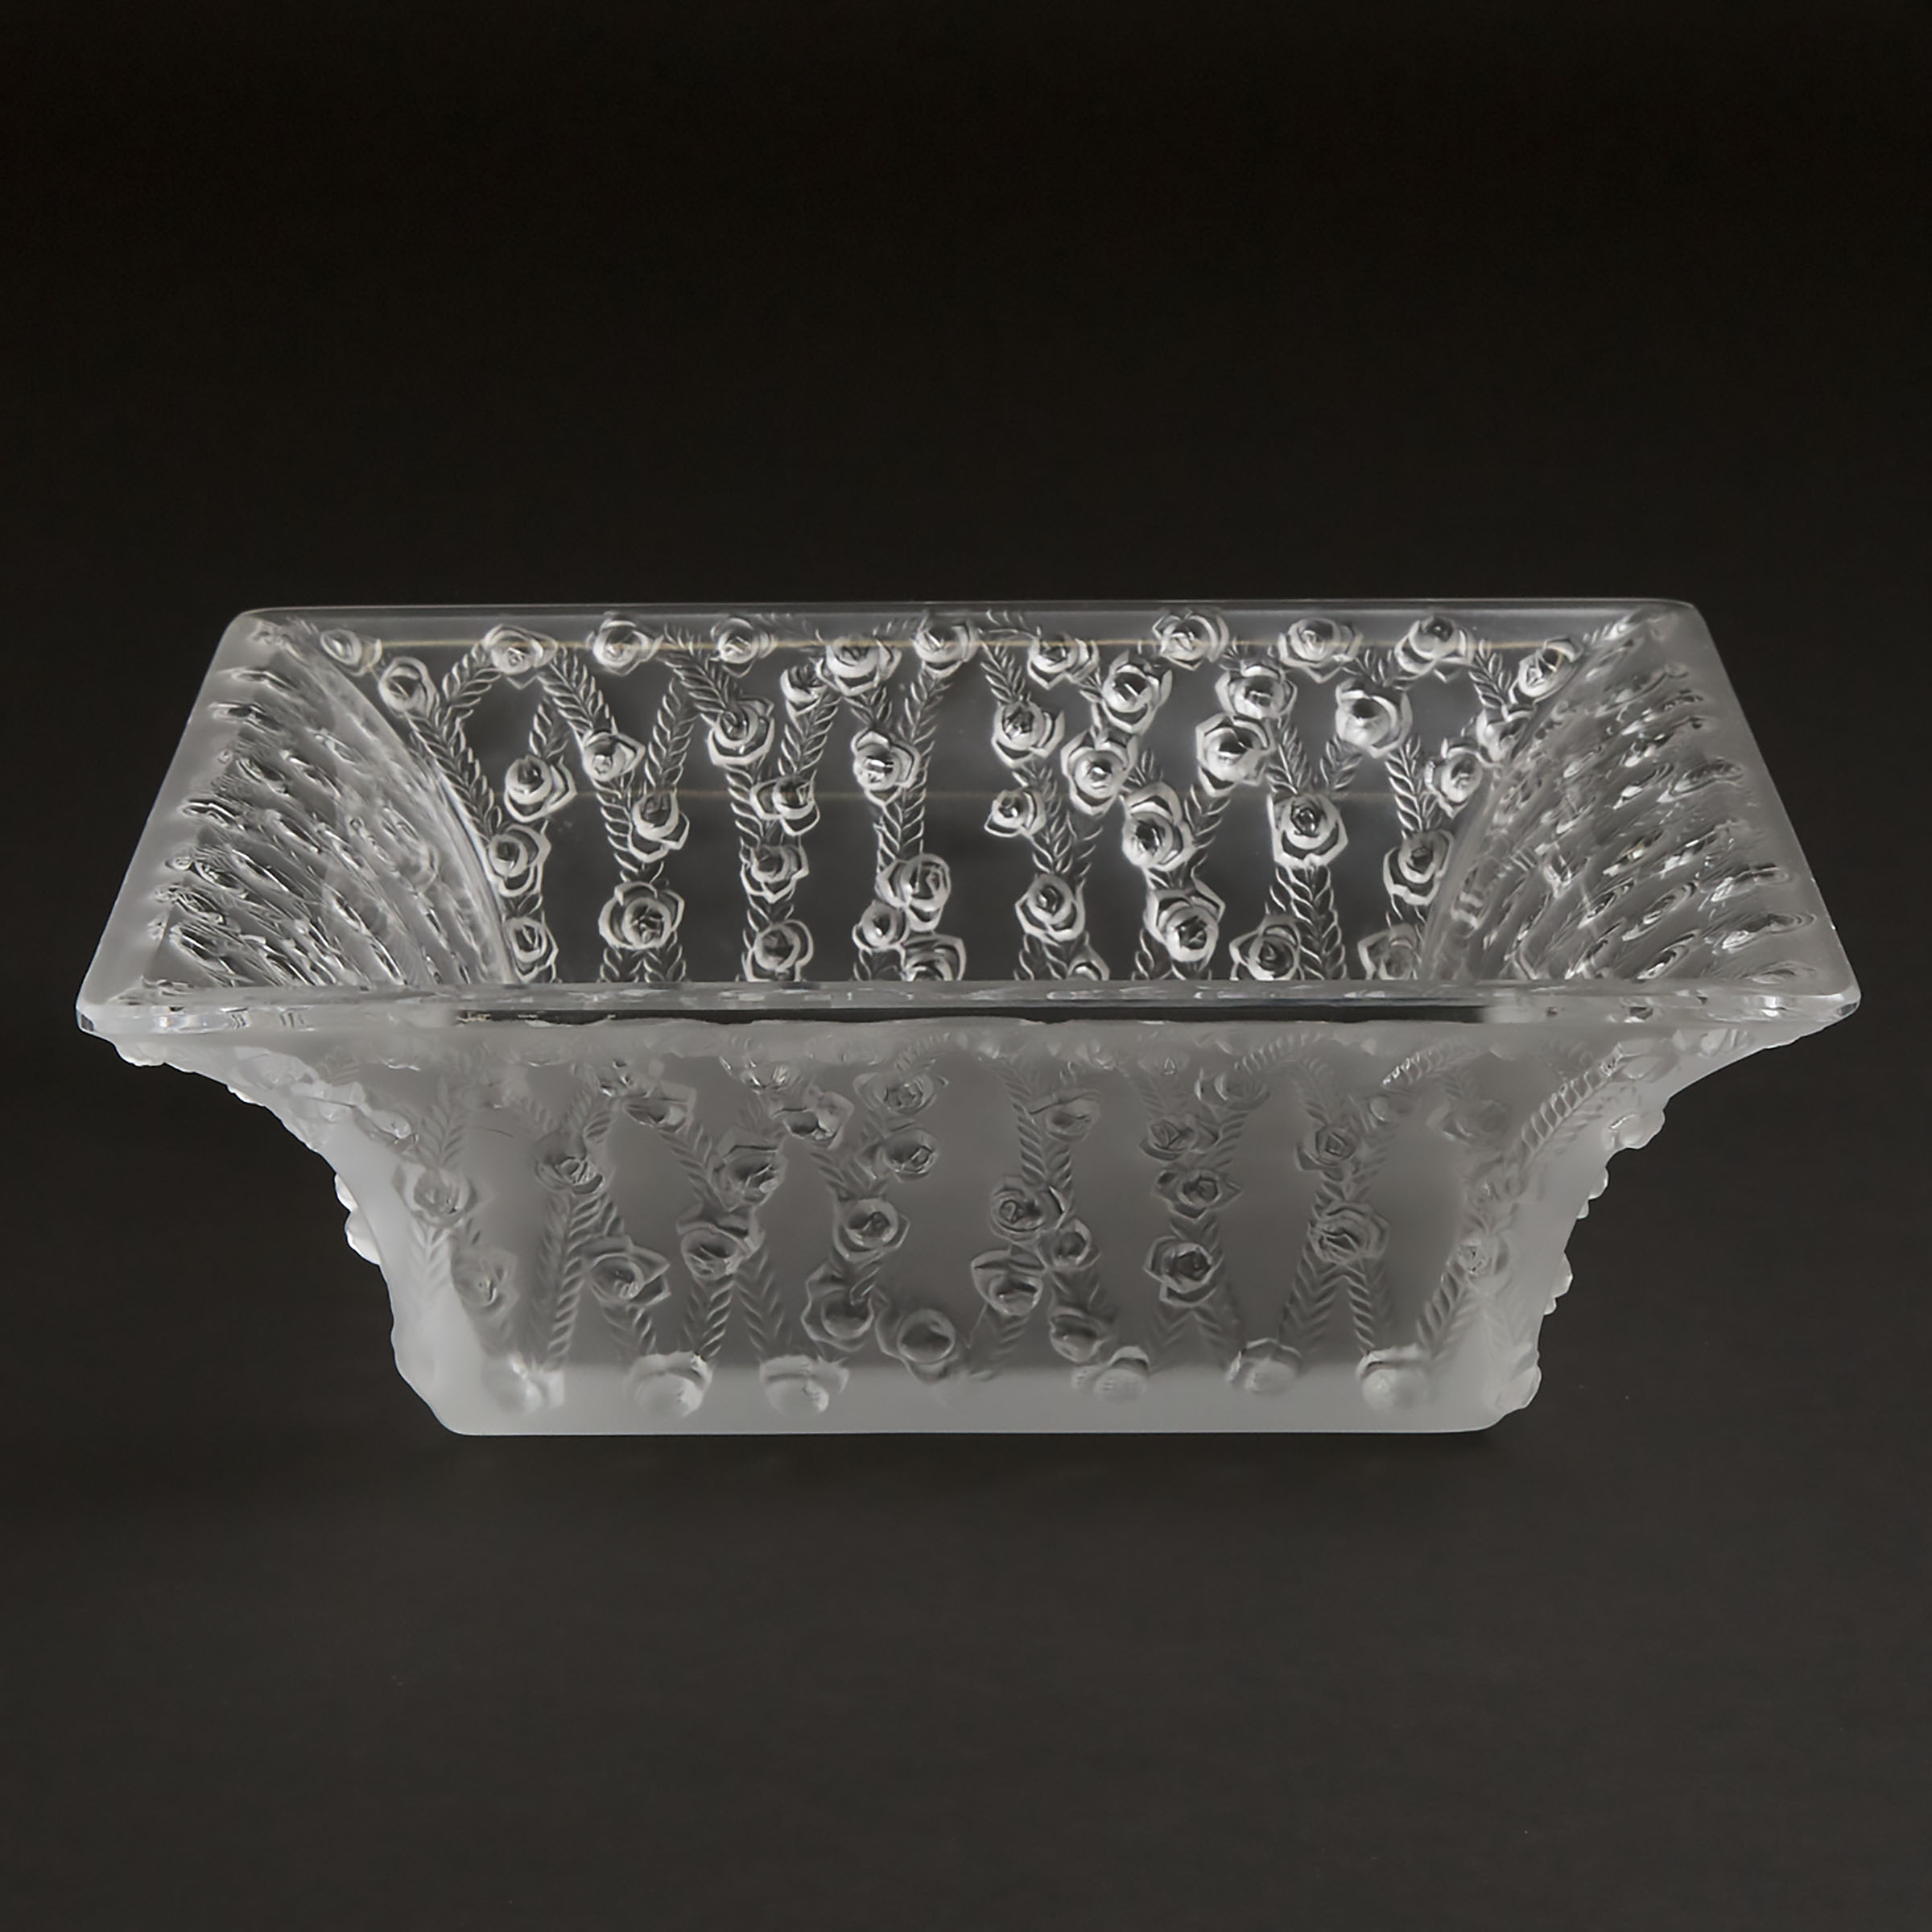 'Roses', Lalique Moulded and Frosted Square Glass Bowl, post-1945